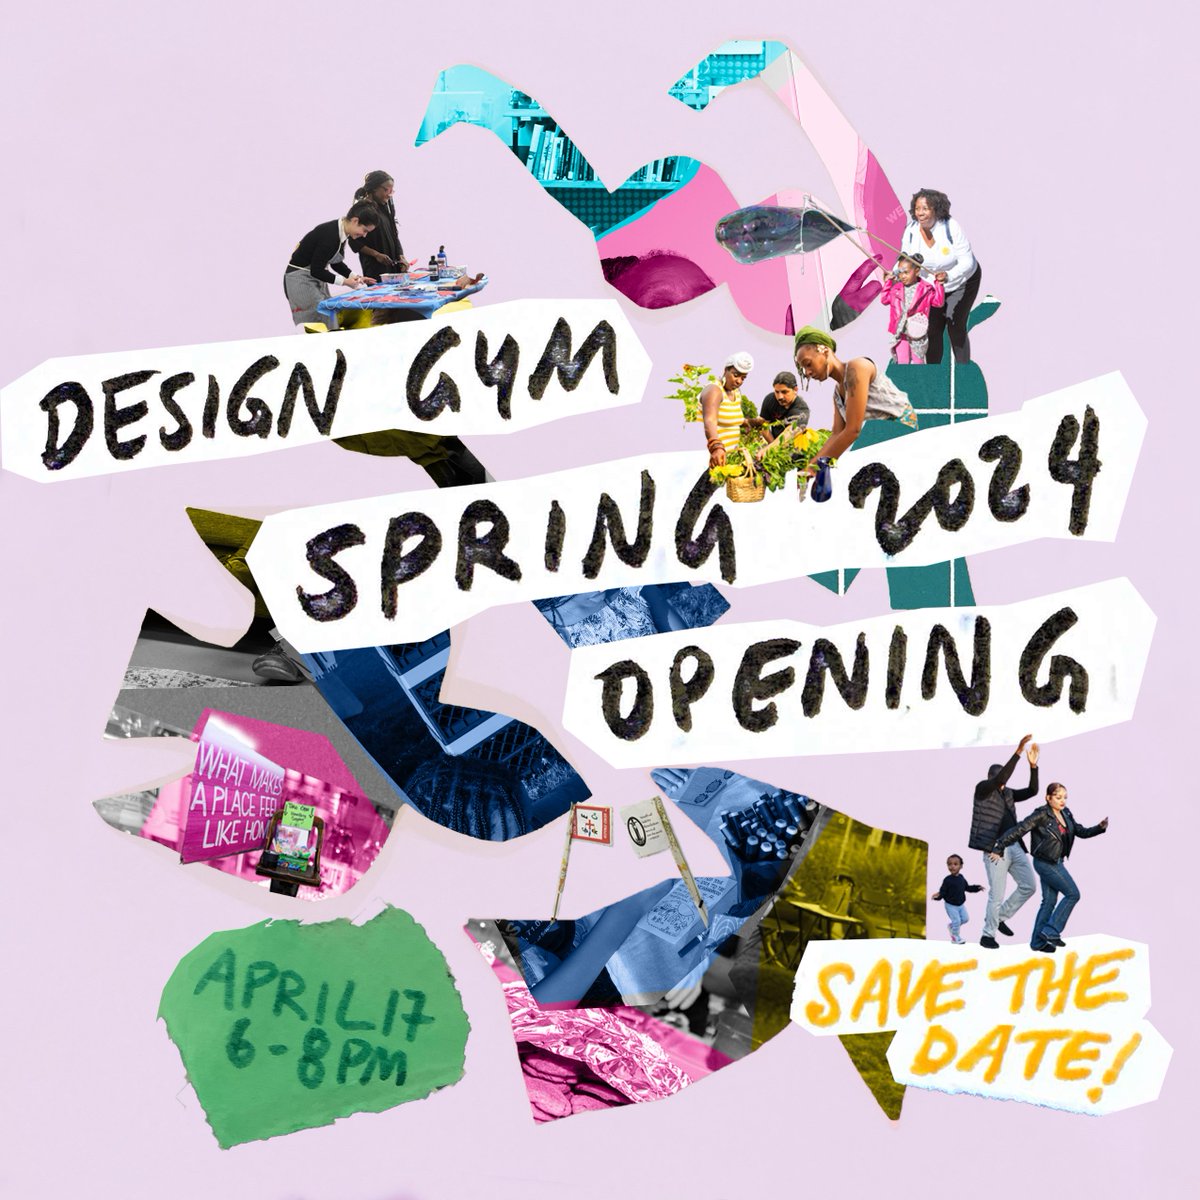 We’re so excited to welcome you into our new spaces and kick off the Design Gym Spring 2024 Semester! Save the date for the grand opening of the new Design Gym on Wednesday, April 17th from 6:00-8:00 p.m 🎉 Click the link in the description for more info!